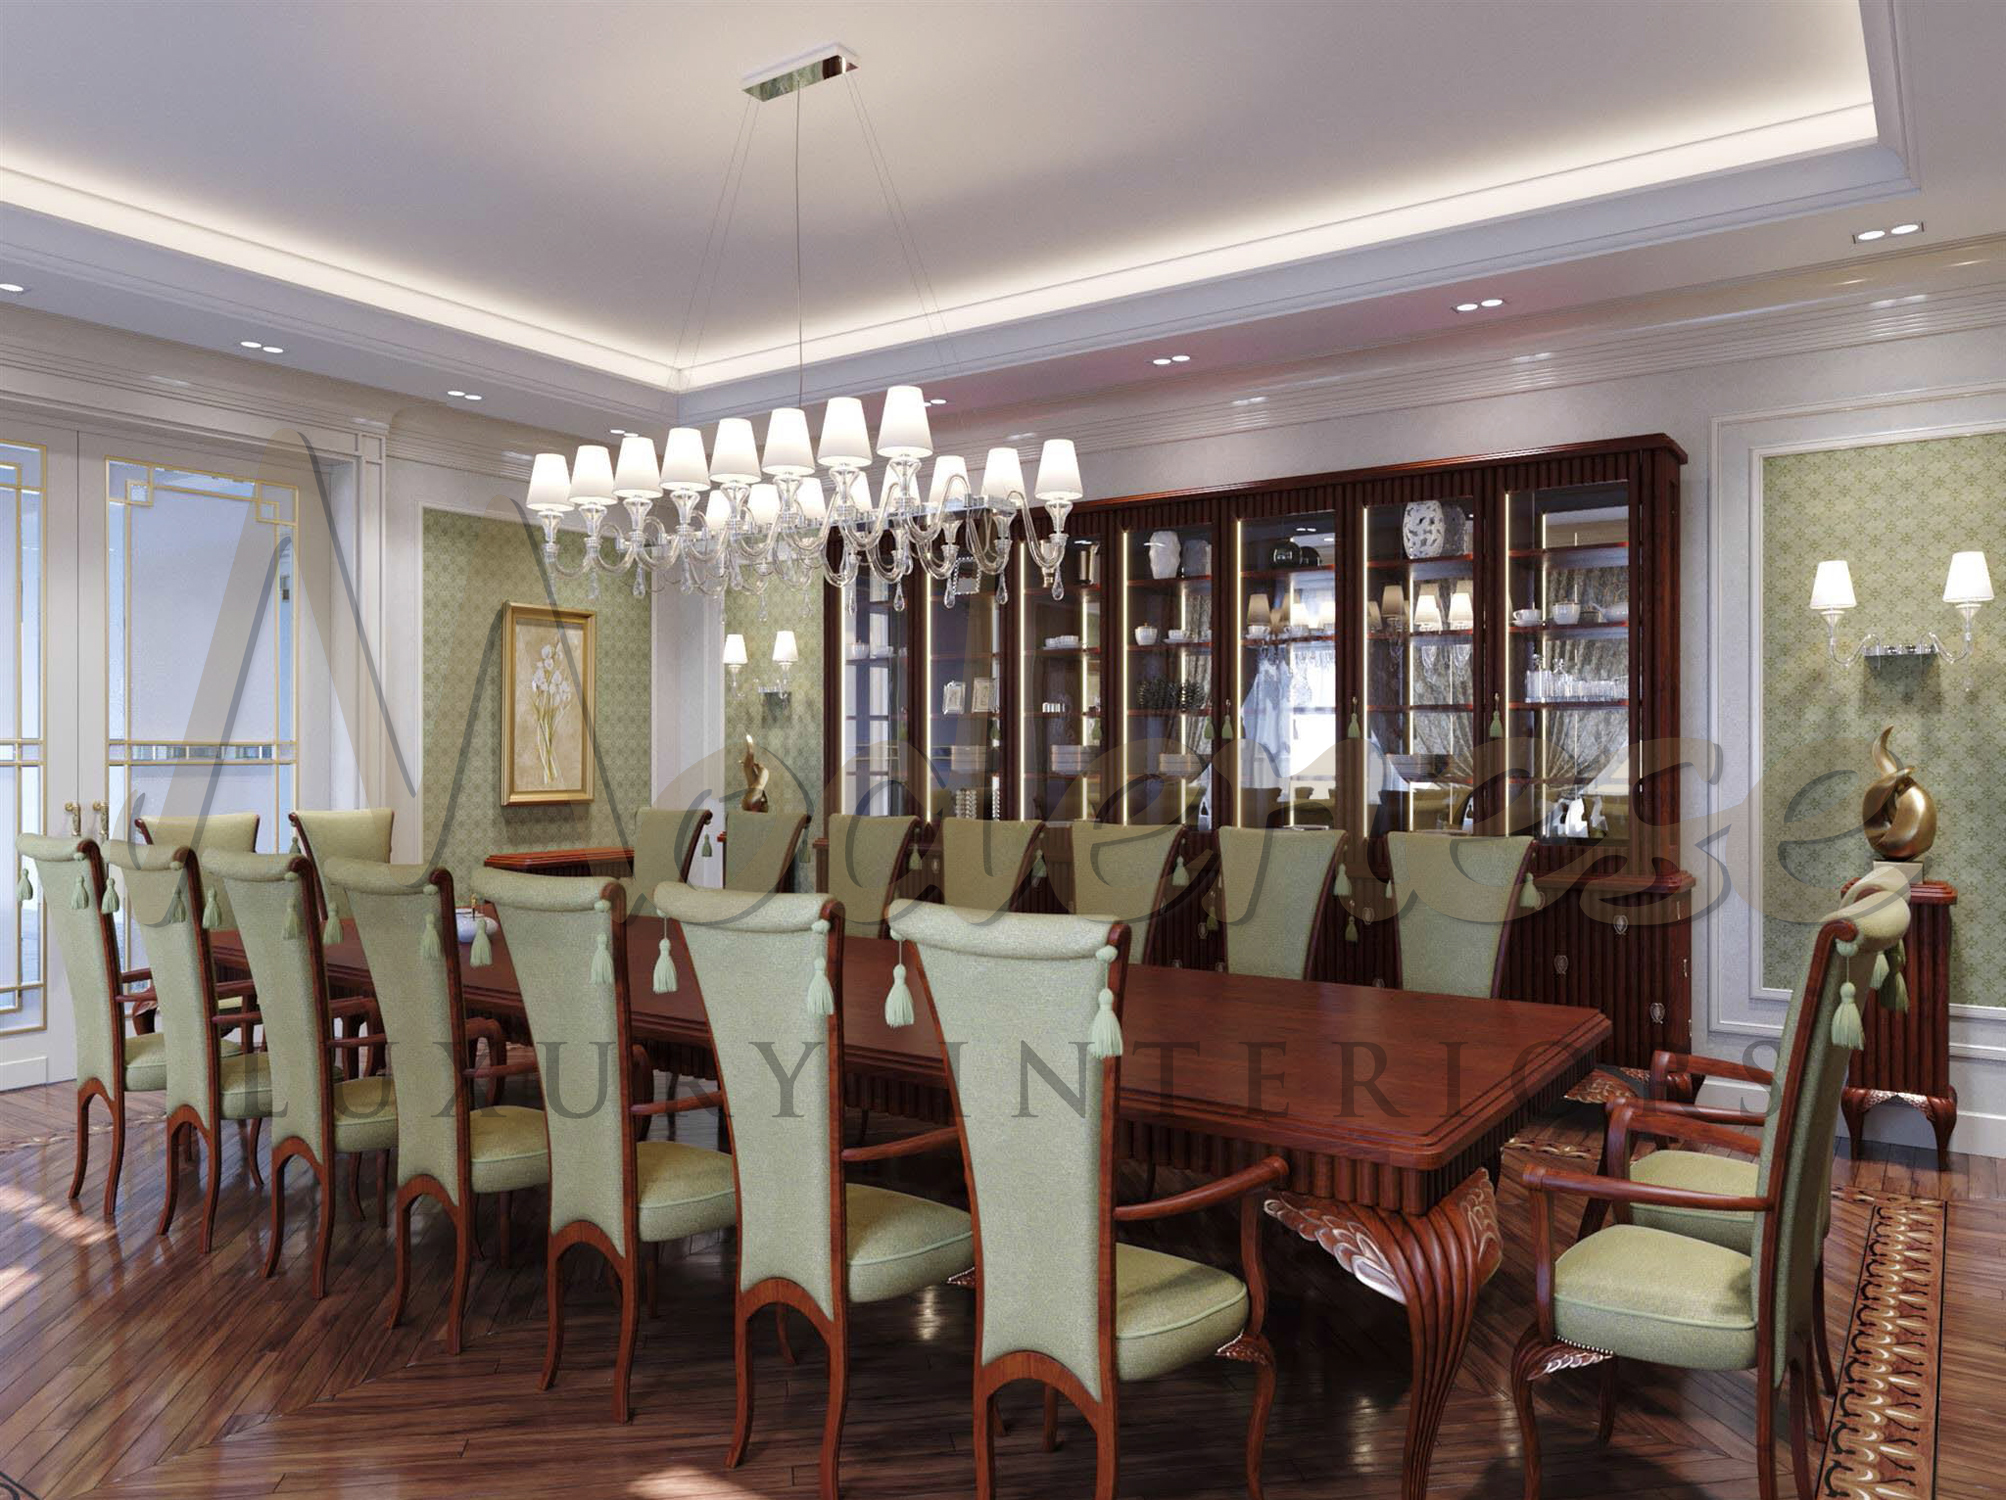 Amazing dining room decoration. Premium furniture manufacturing. Elegant dining room table and exclusive cabinets for dining room. Best interior design company in New York.